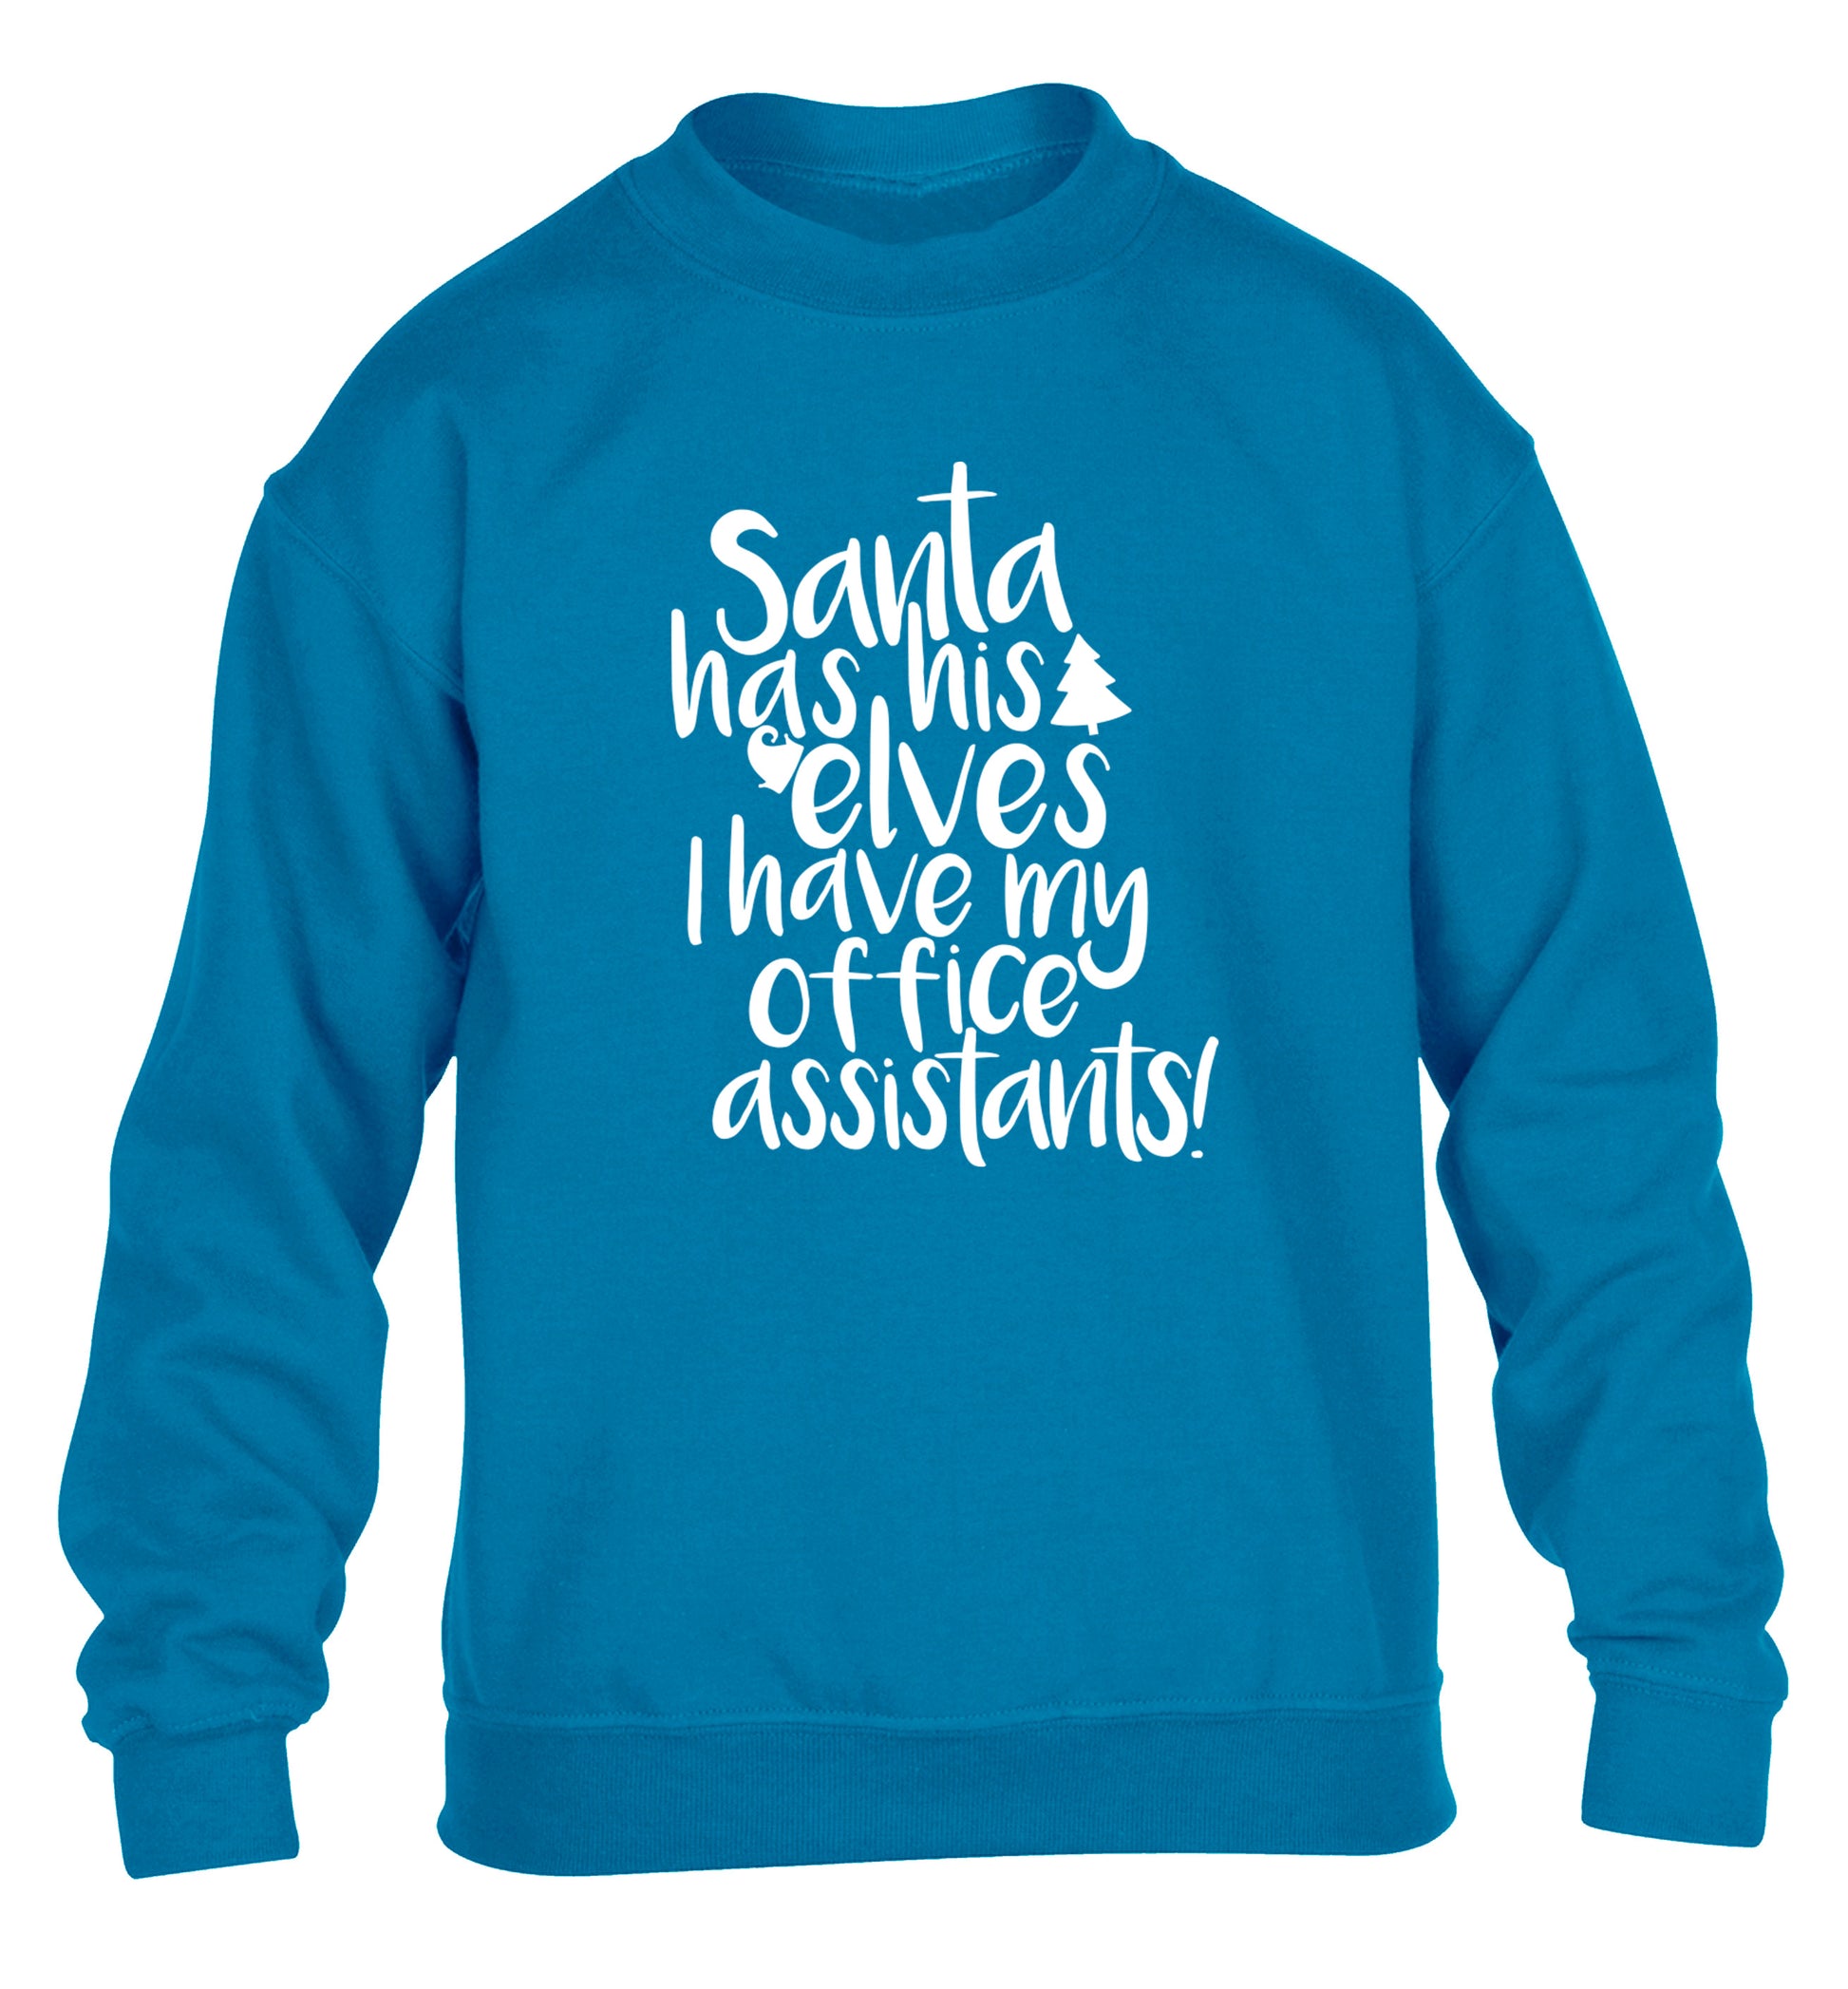 Santa has his elves I have my office assistants children's blue sweater 12-14 Years